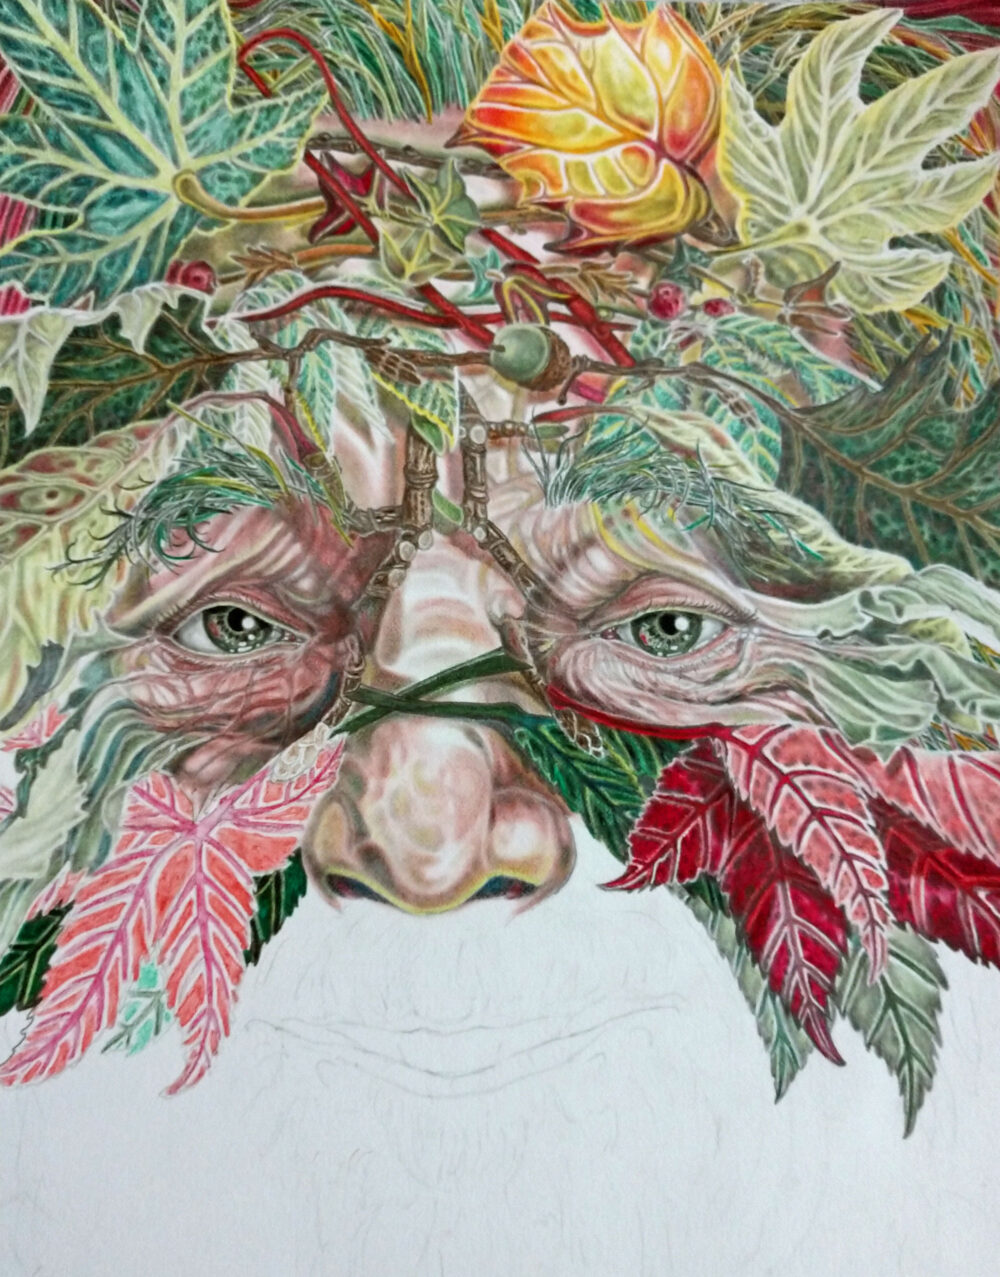 THE GREEN MAN, painting Day 22 his rosy cheeks